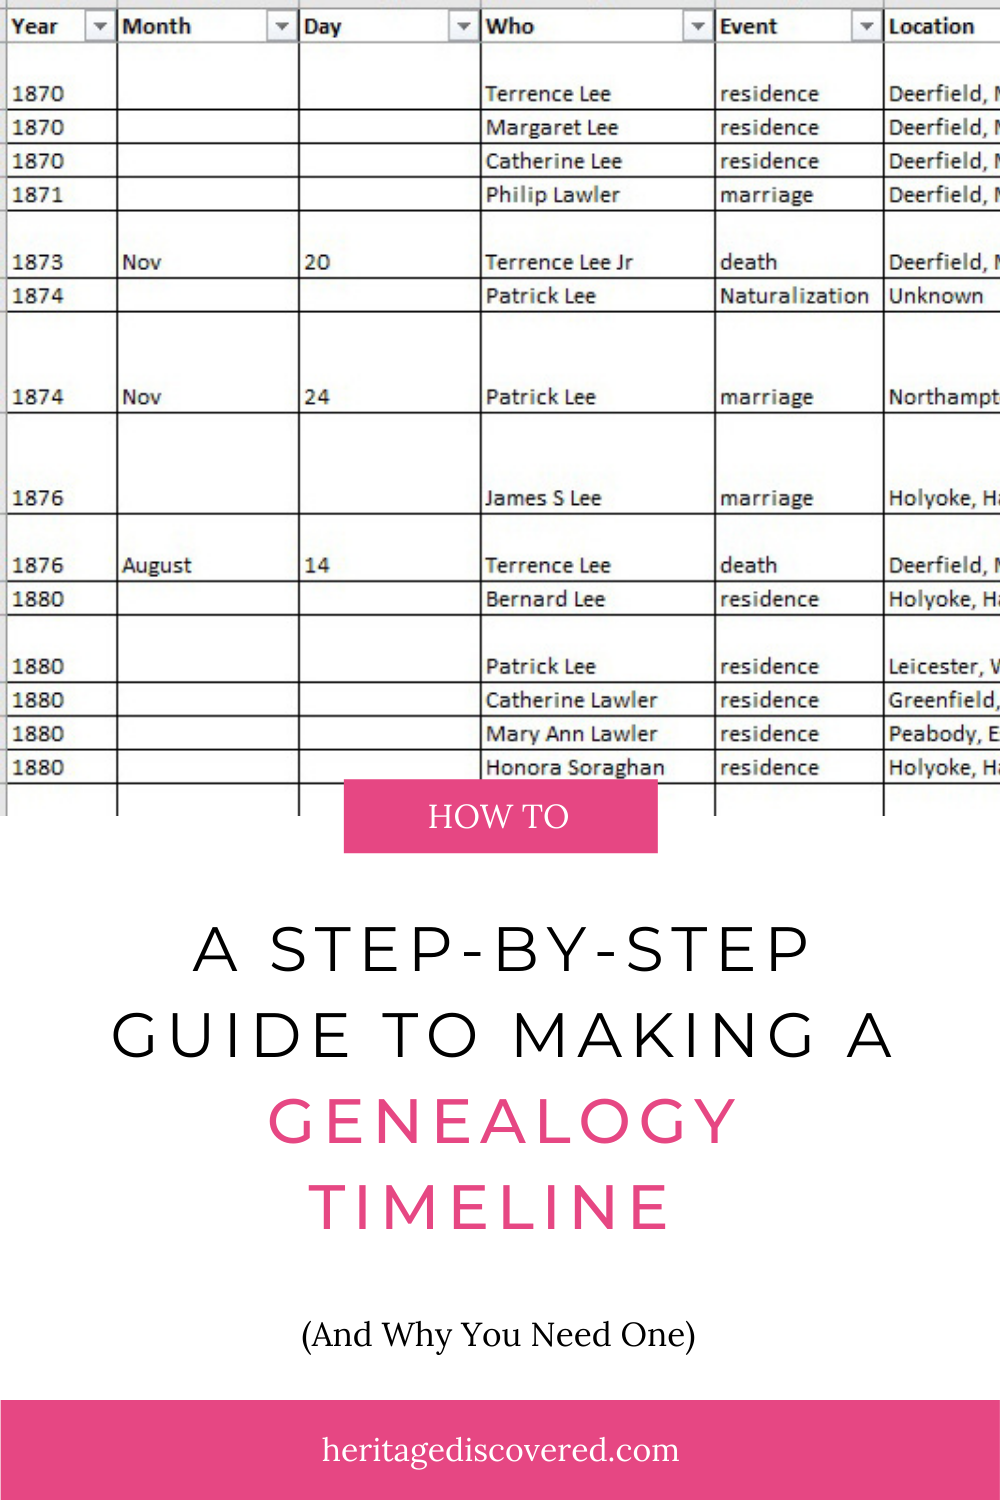 step-by-step-guide-making-genealogy-timeline.png